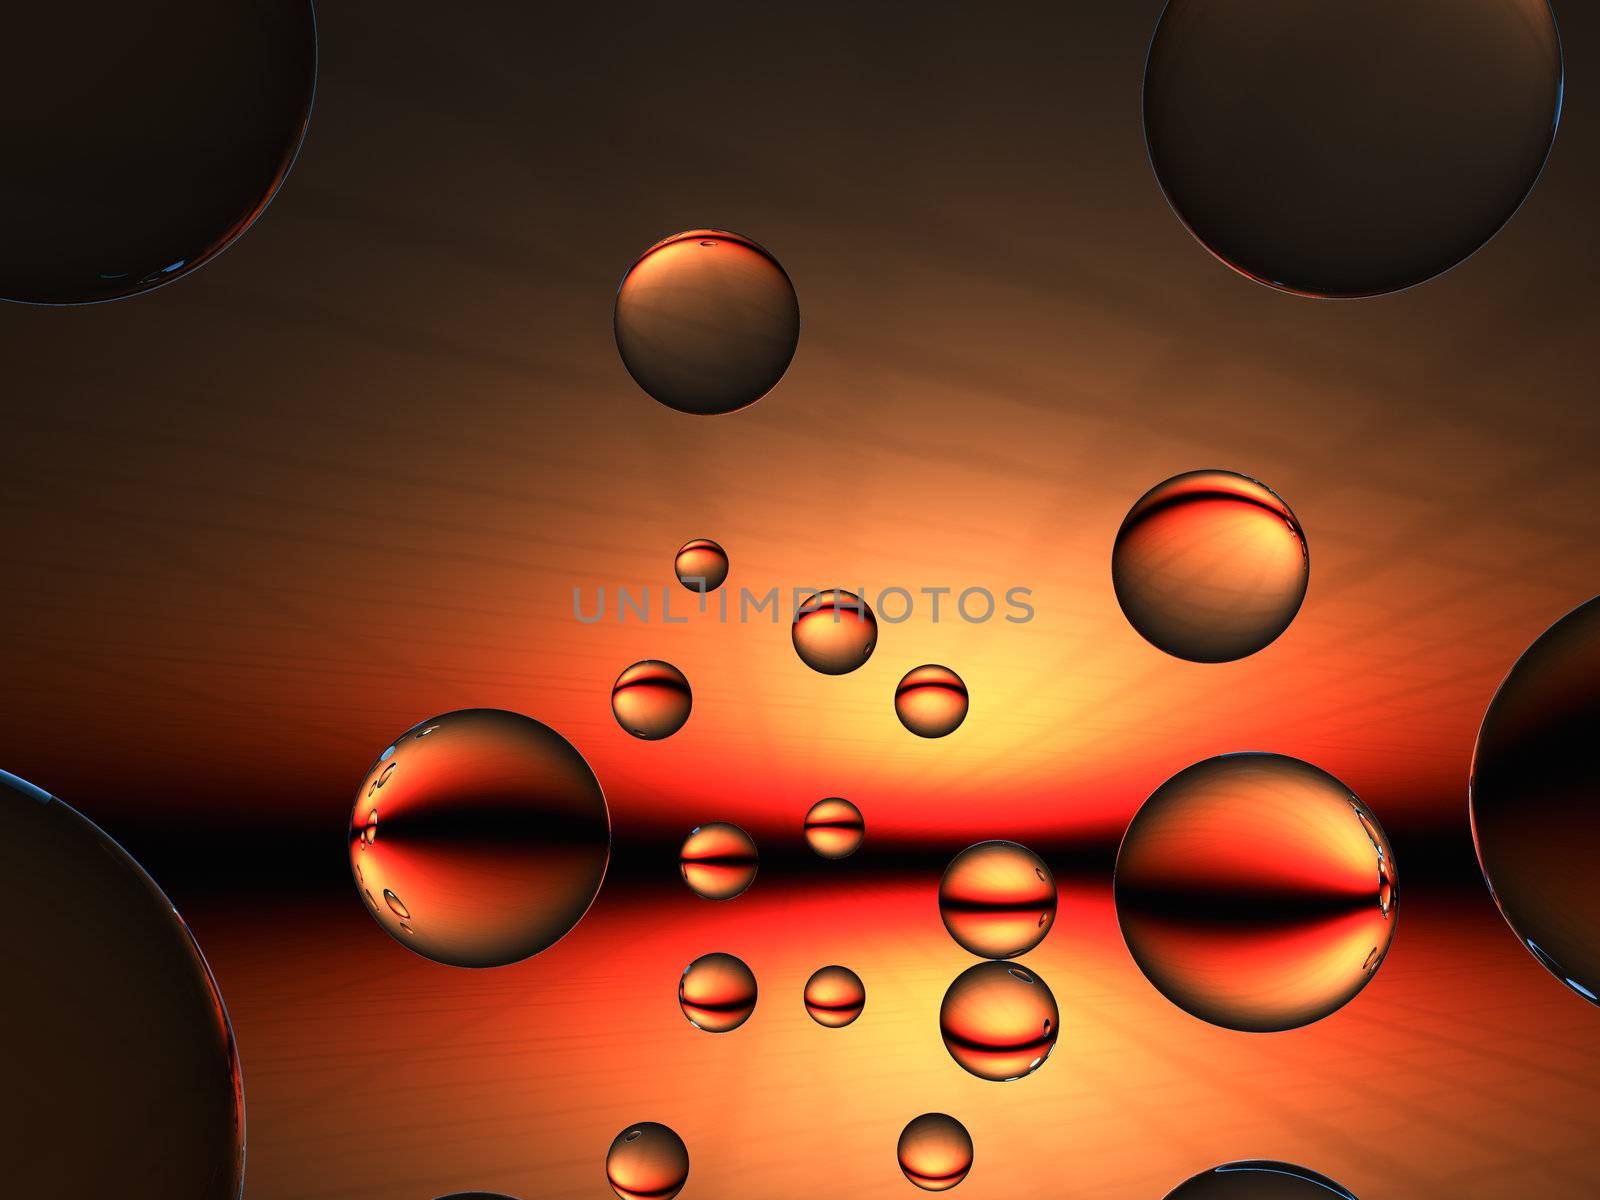 Crystal orbs on an sun setting evening horizon grid. A concept of a future view maturing or ending.